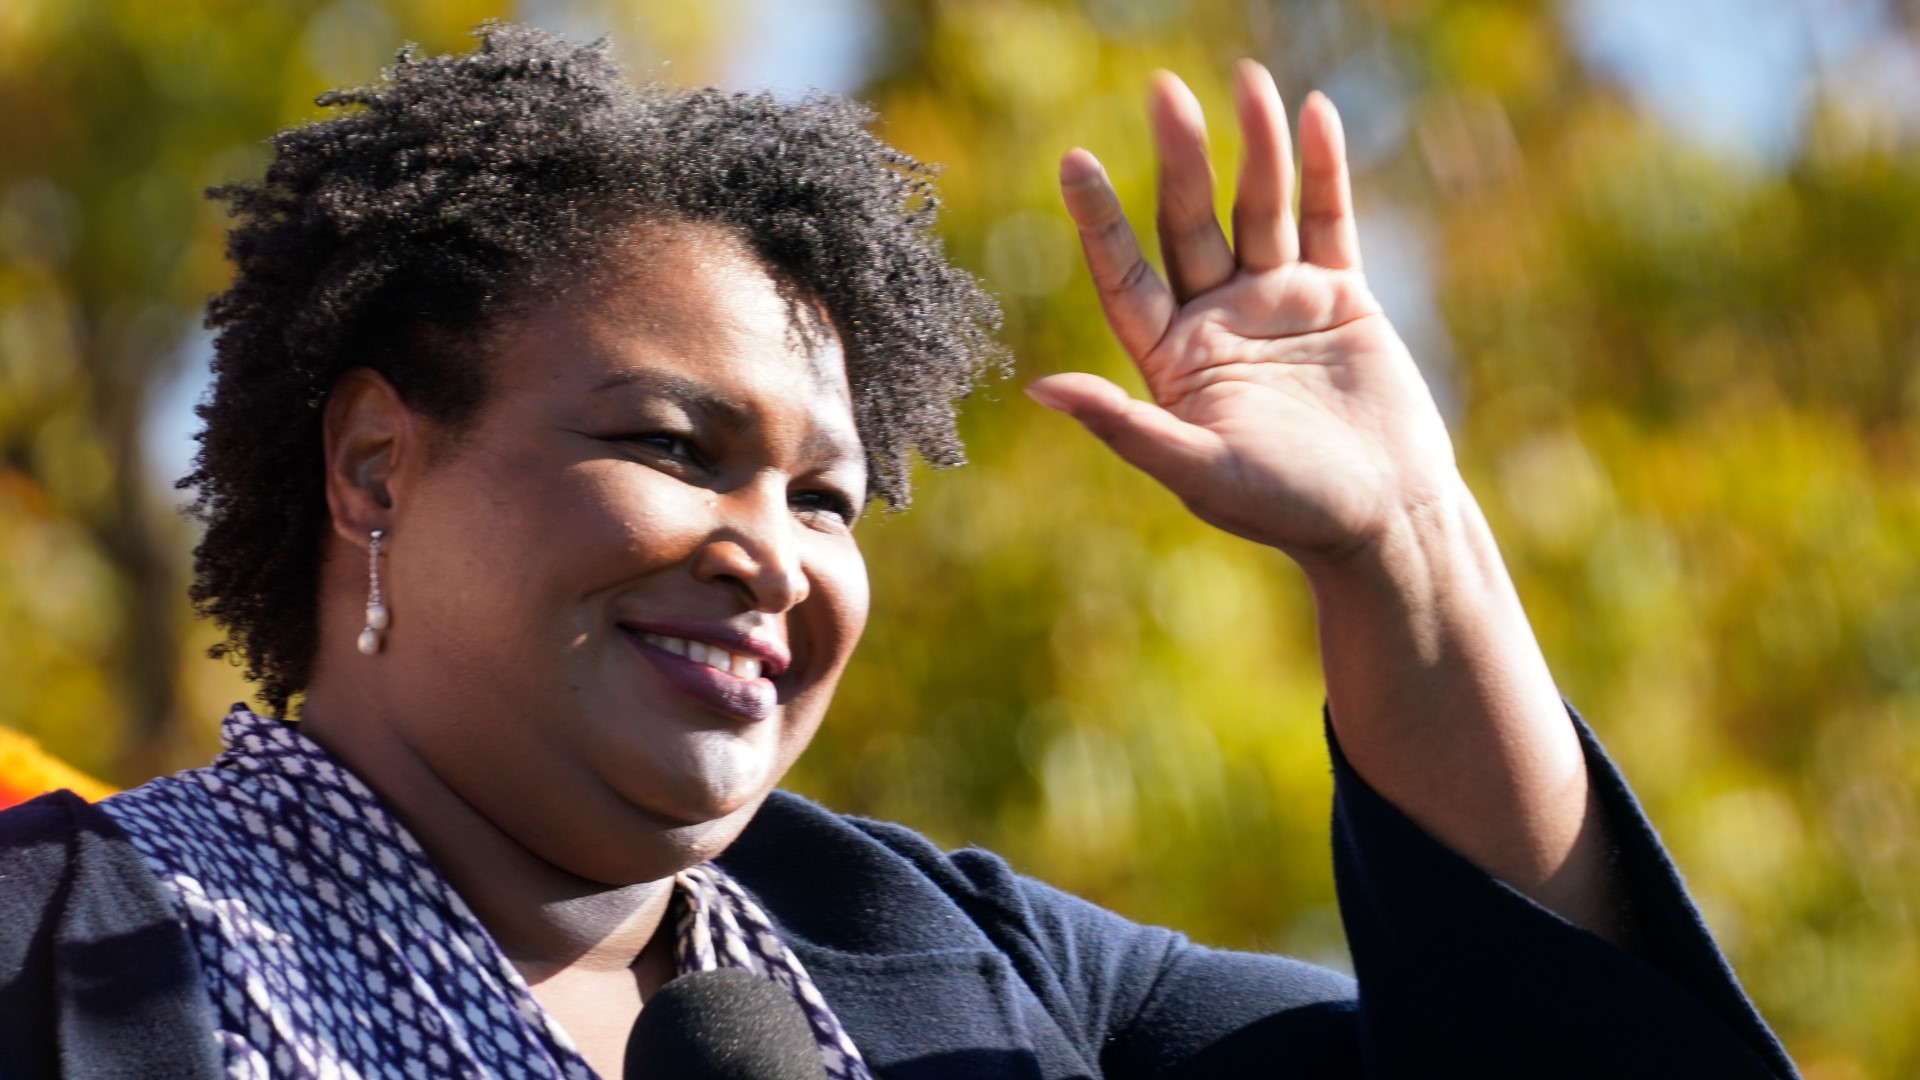 Democrat and governor hopeful Stacey Abrams gave her economic plan Tuesday night in front of business owners at the Atlantucky Brewery in Atlanta.